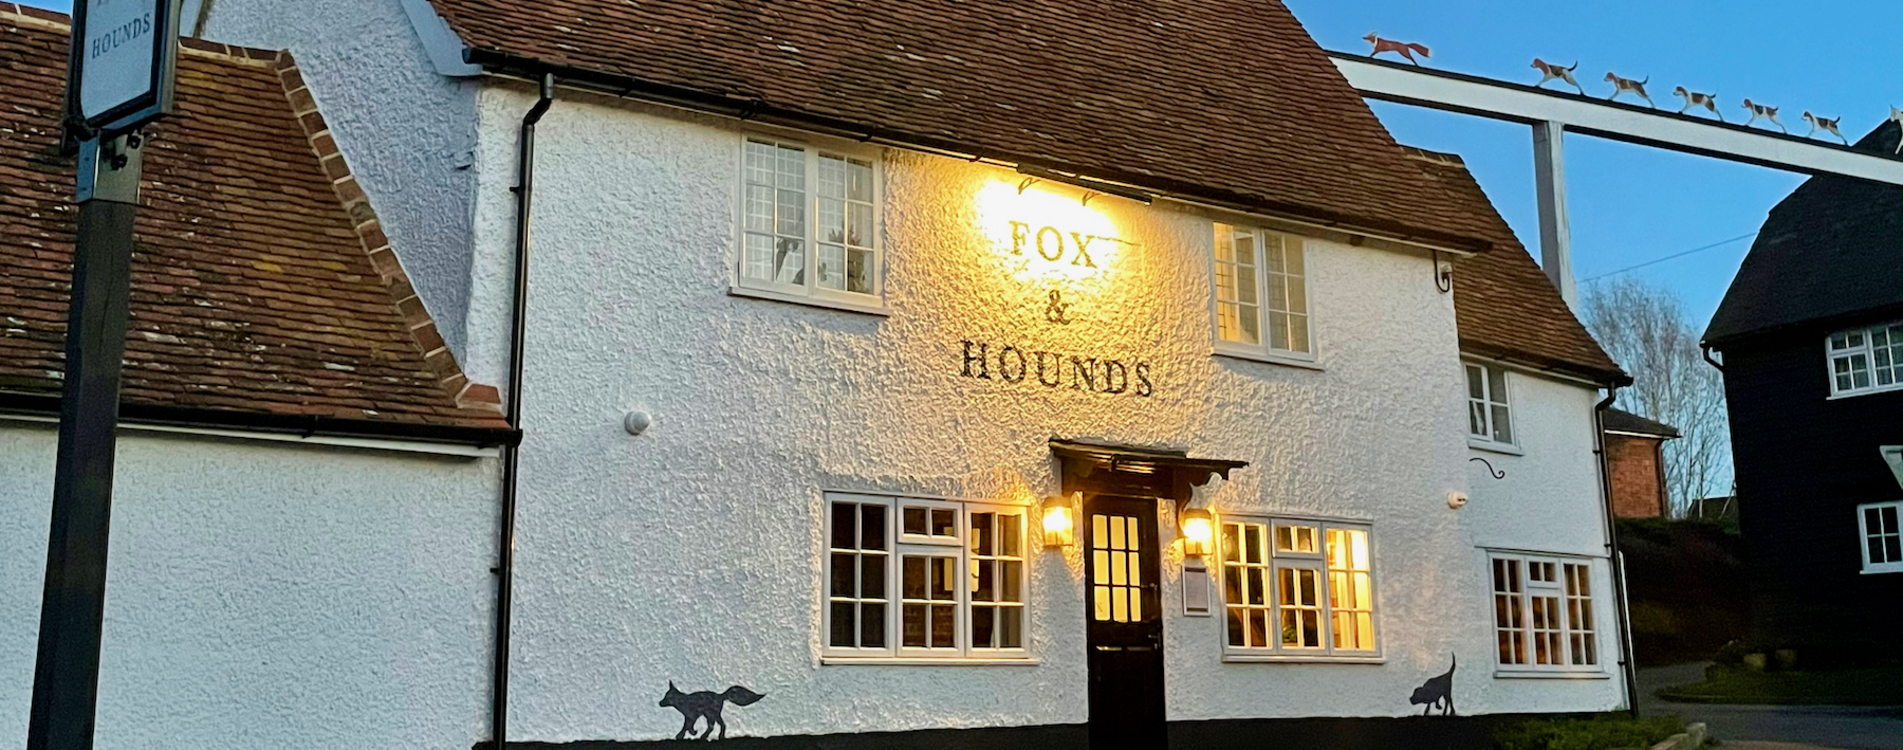 fox-and-hounds-pub (cropped)